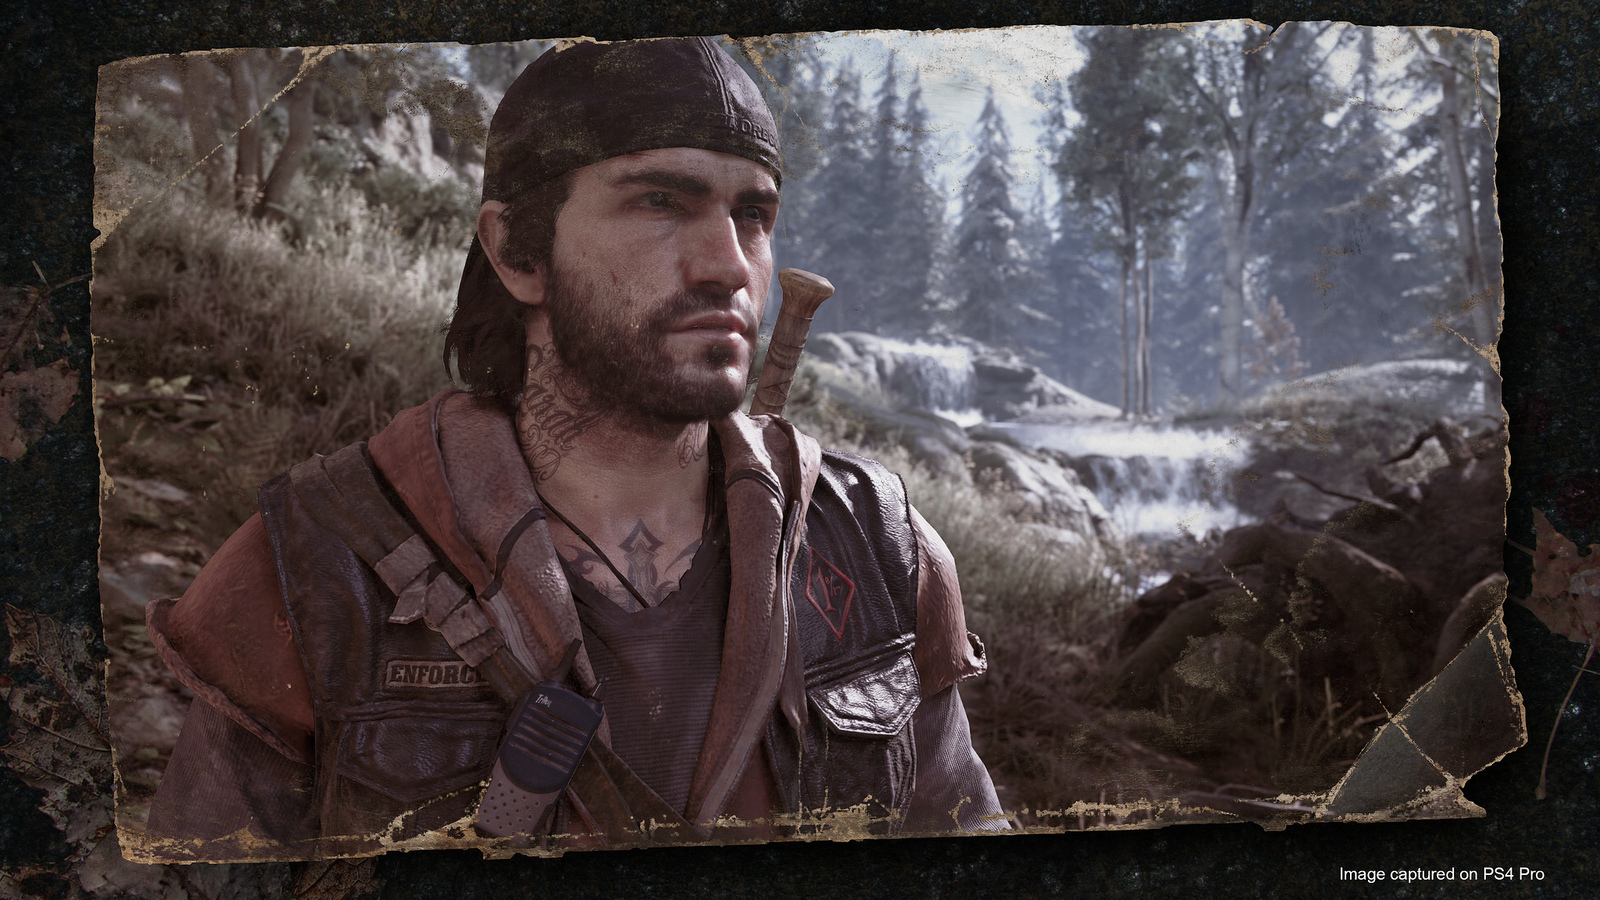 Days Gone, PS4, PlayStation 4, US, Europe, Asia, gameplay, features, release date, price, trailer, screenshots, update, Photo Mode